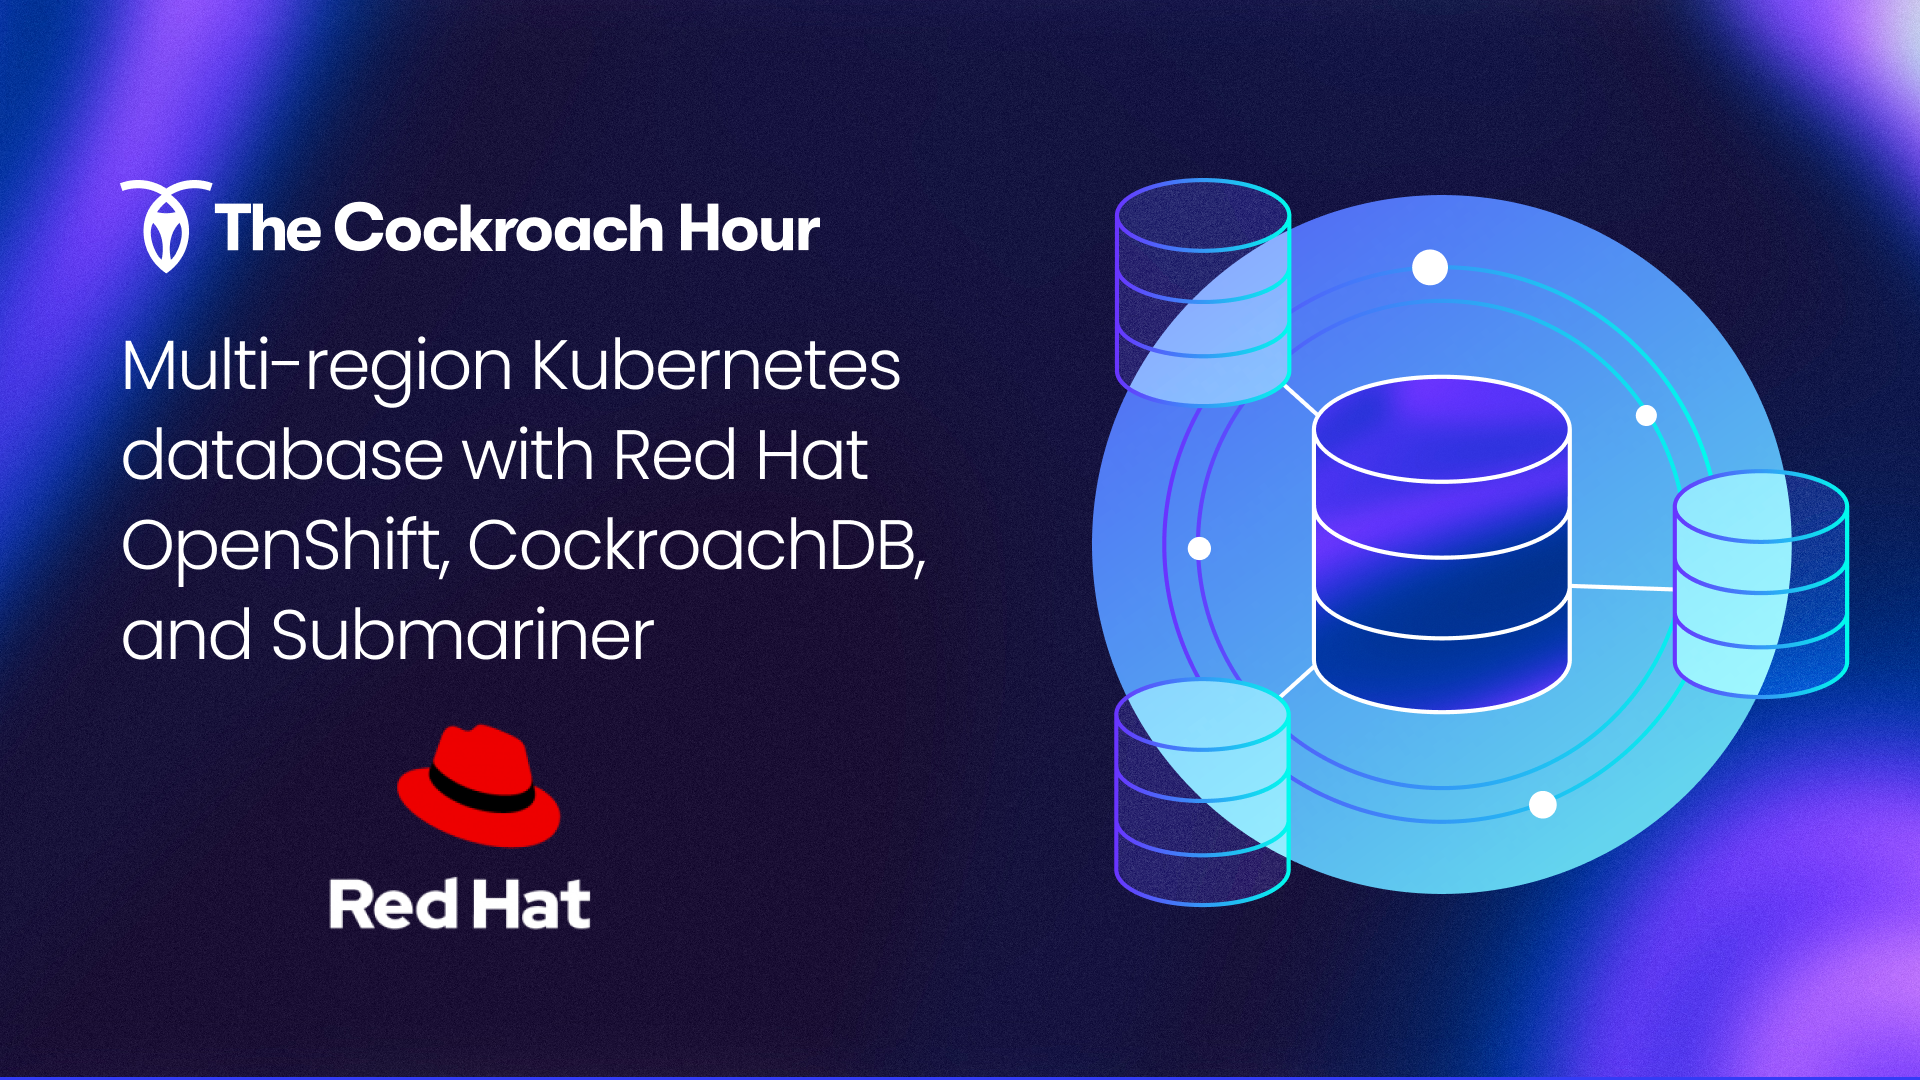 The Cockroach Hour: Multi-region Kubernetes database with Red Hat OpenShift, CockroachDB, and Submariner